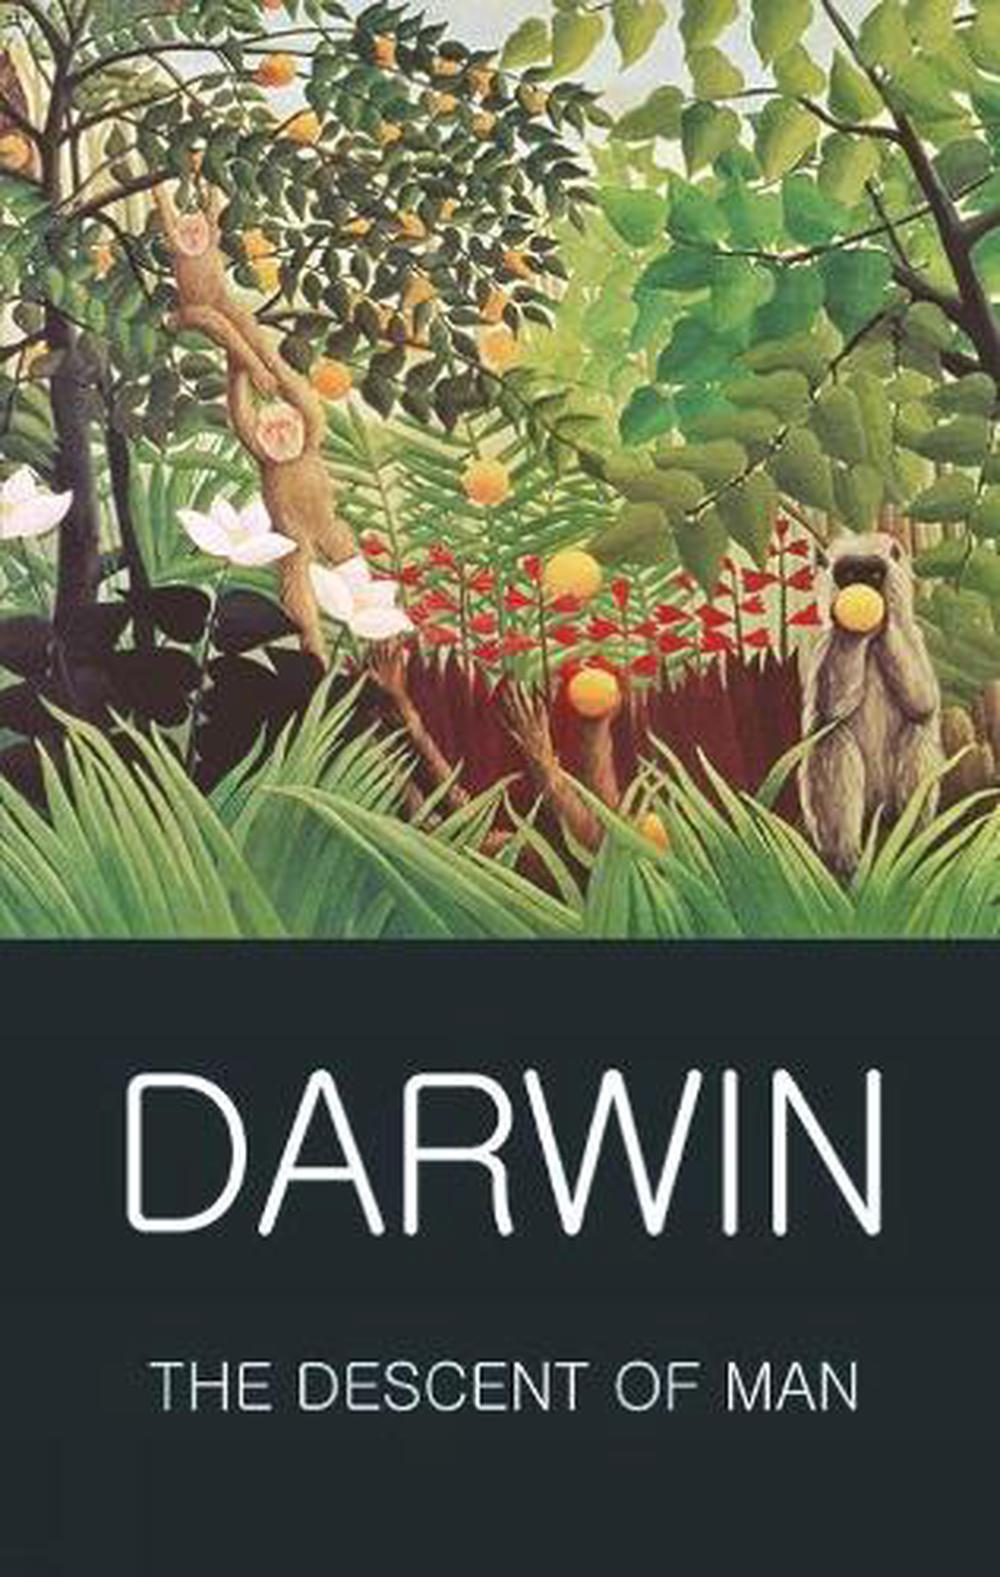 The Descent Of Man By Charles Darwin Paperback 9781840226980 Buy Online At The Nile